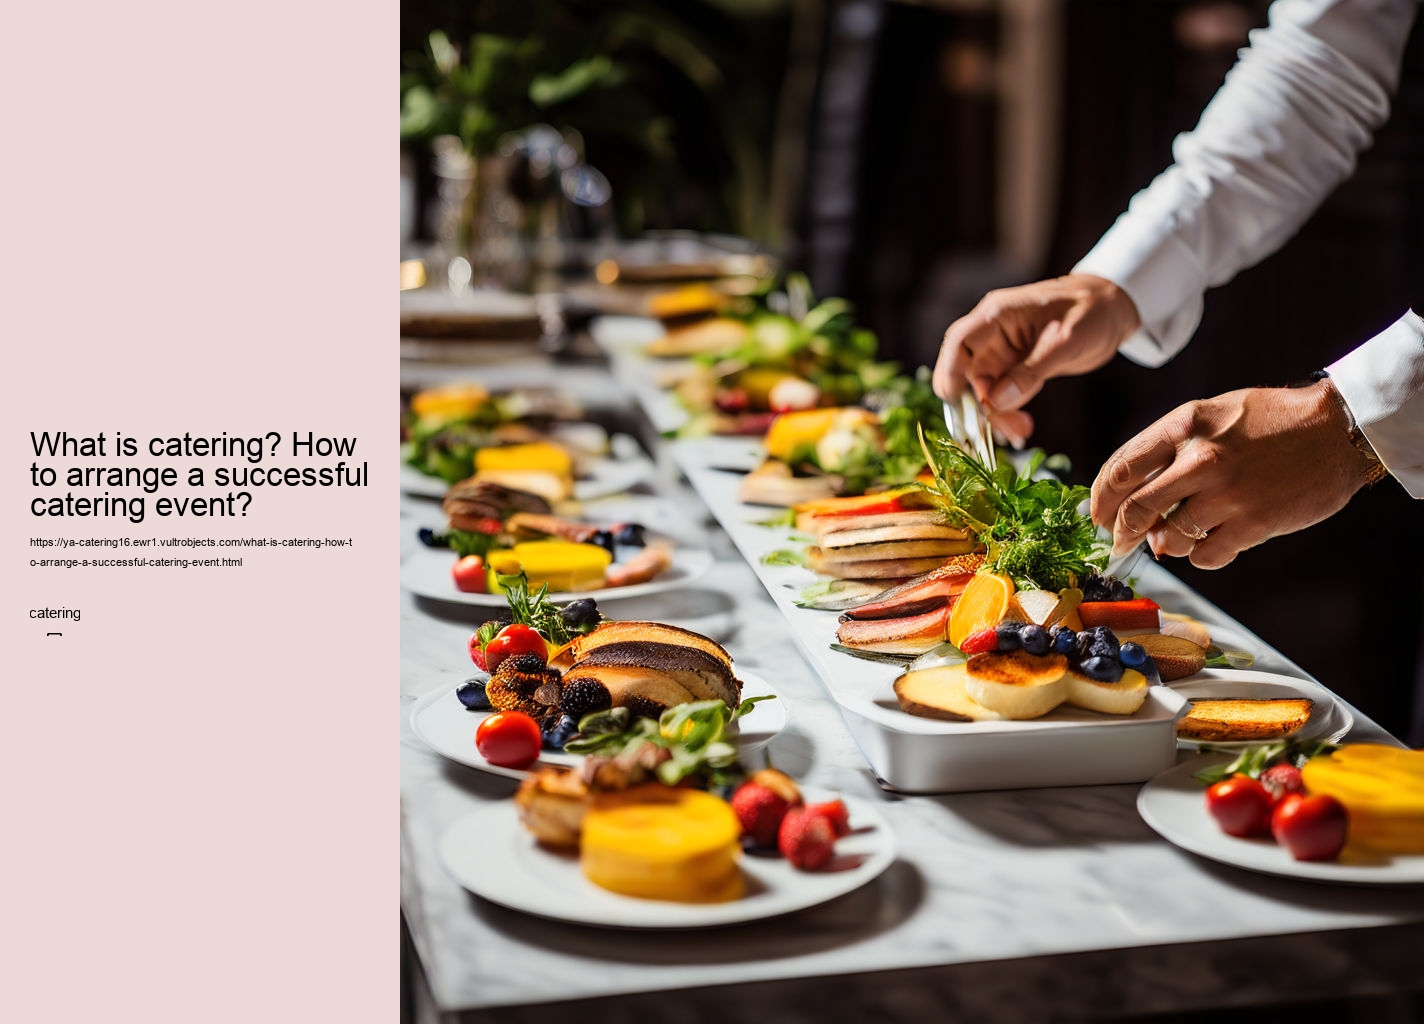 What is catering? How to arrange a successful catering event?